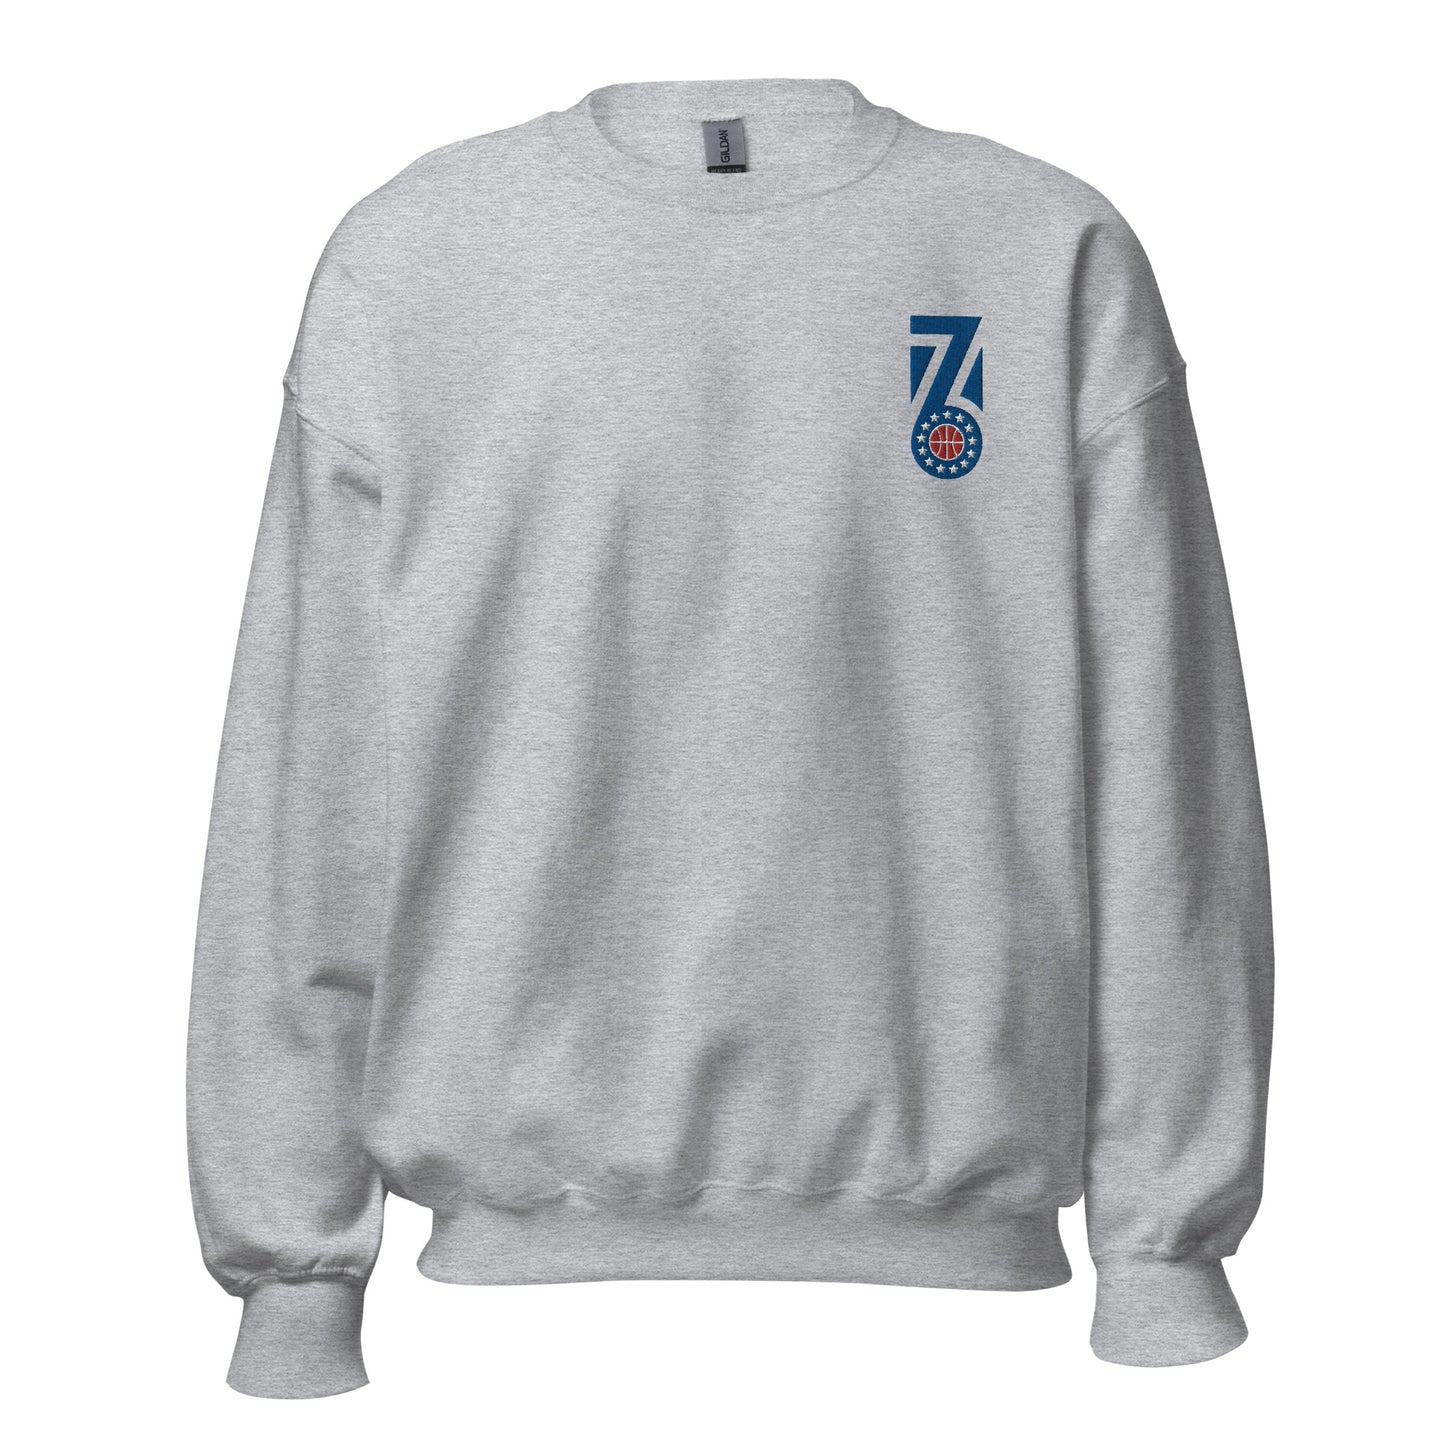 Vintage Style Hand Embroidered 76ers Crew